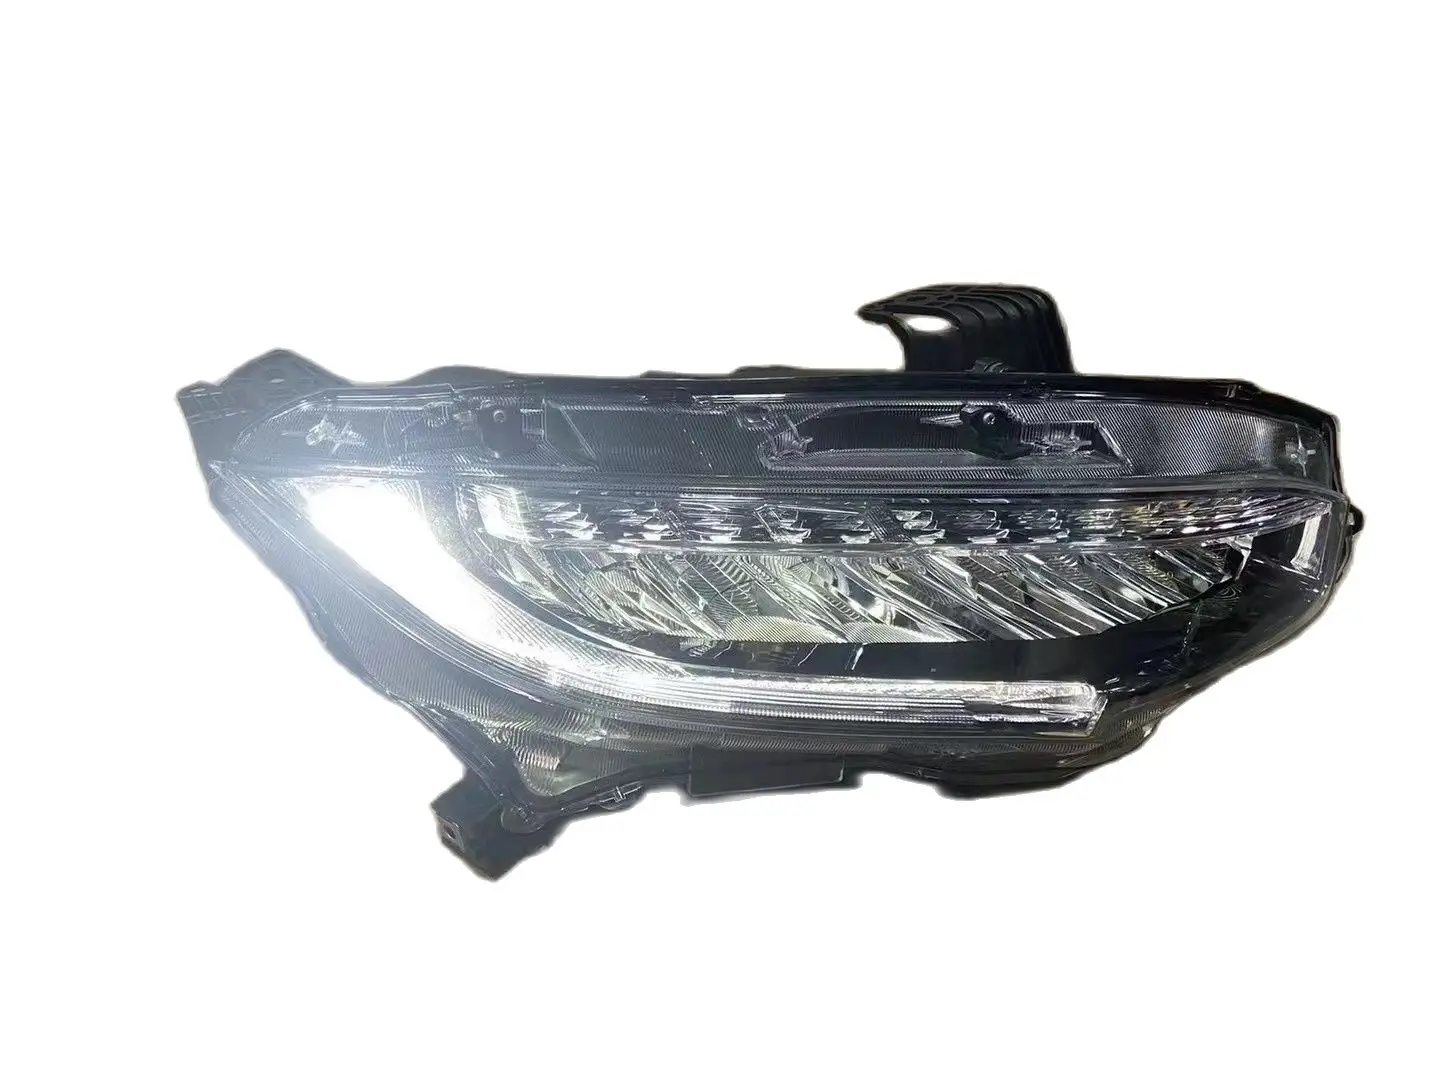 

Car Accessories LED Lamp For 2015-2018 Honda Civic Headlight High Quality Original Vehicle Headlamp Assembly Auto Light Systems